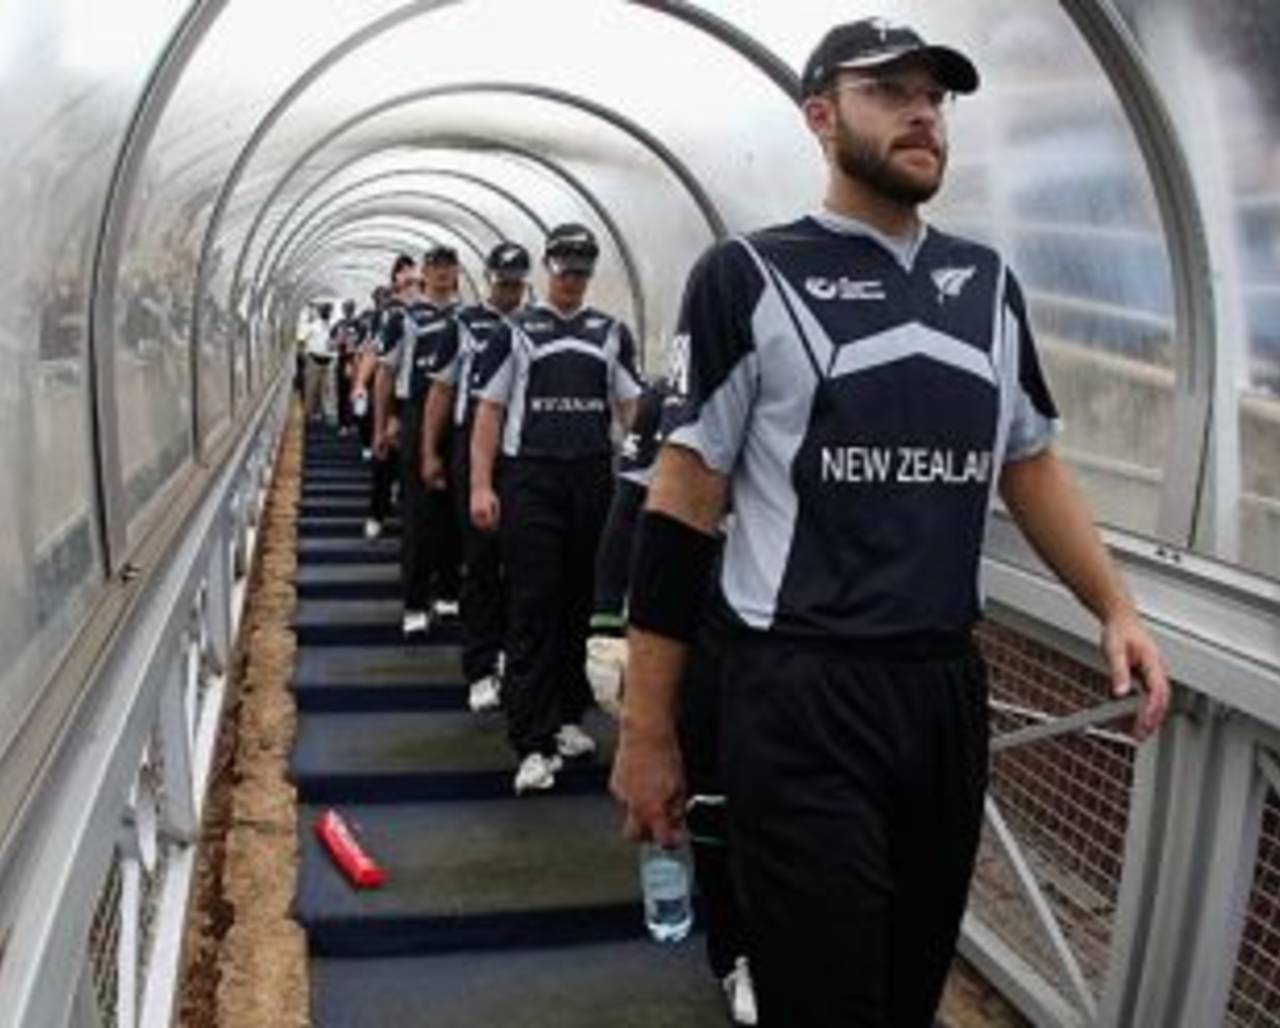 The New Zealand Cricket awards reaffirmed Daniel Vettori's status as the country's leading cricketer&nbsp;&nbsp;&bull;&nbsp;&nbsp;Getty Images